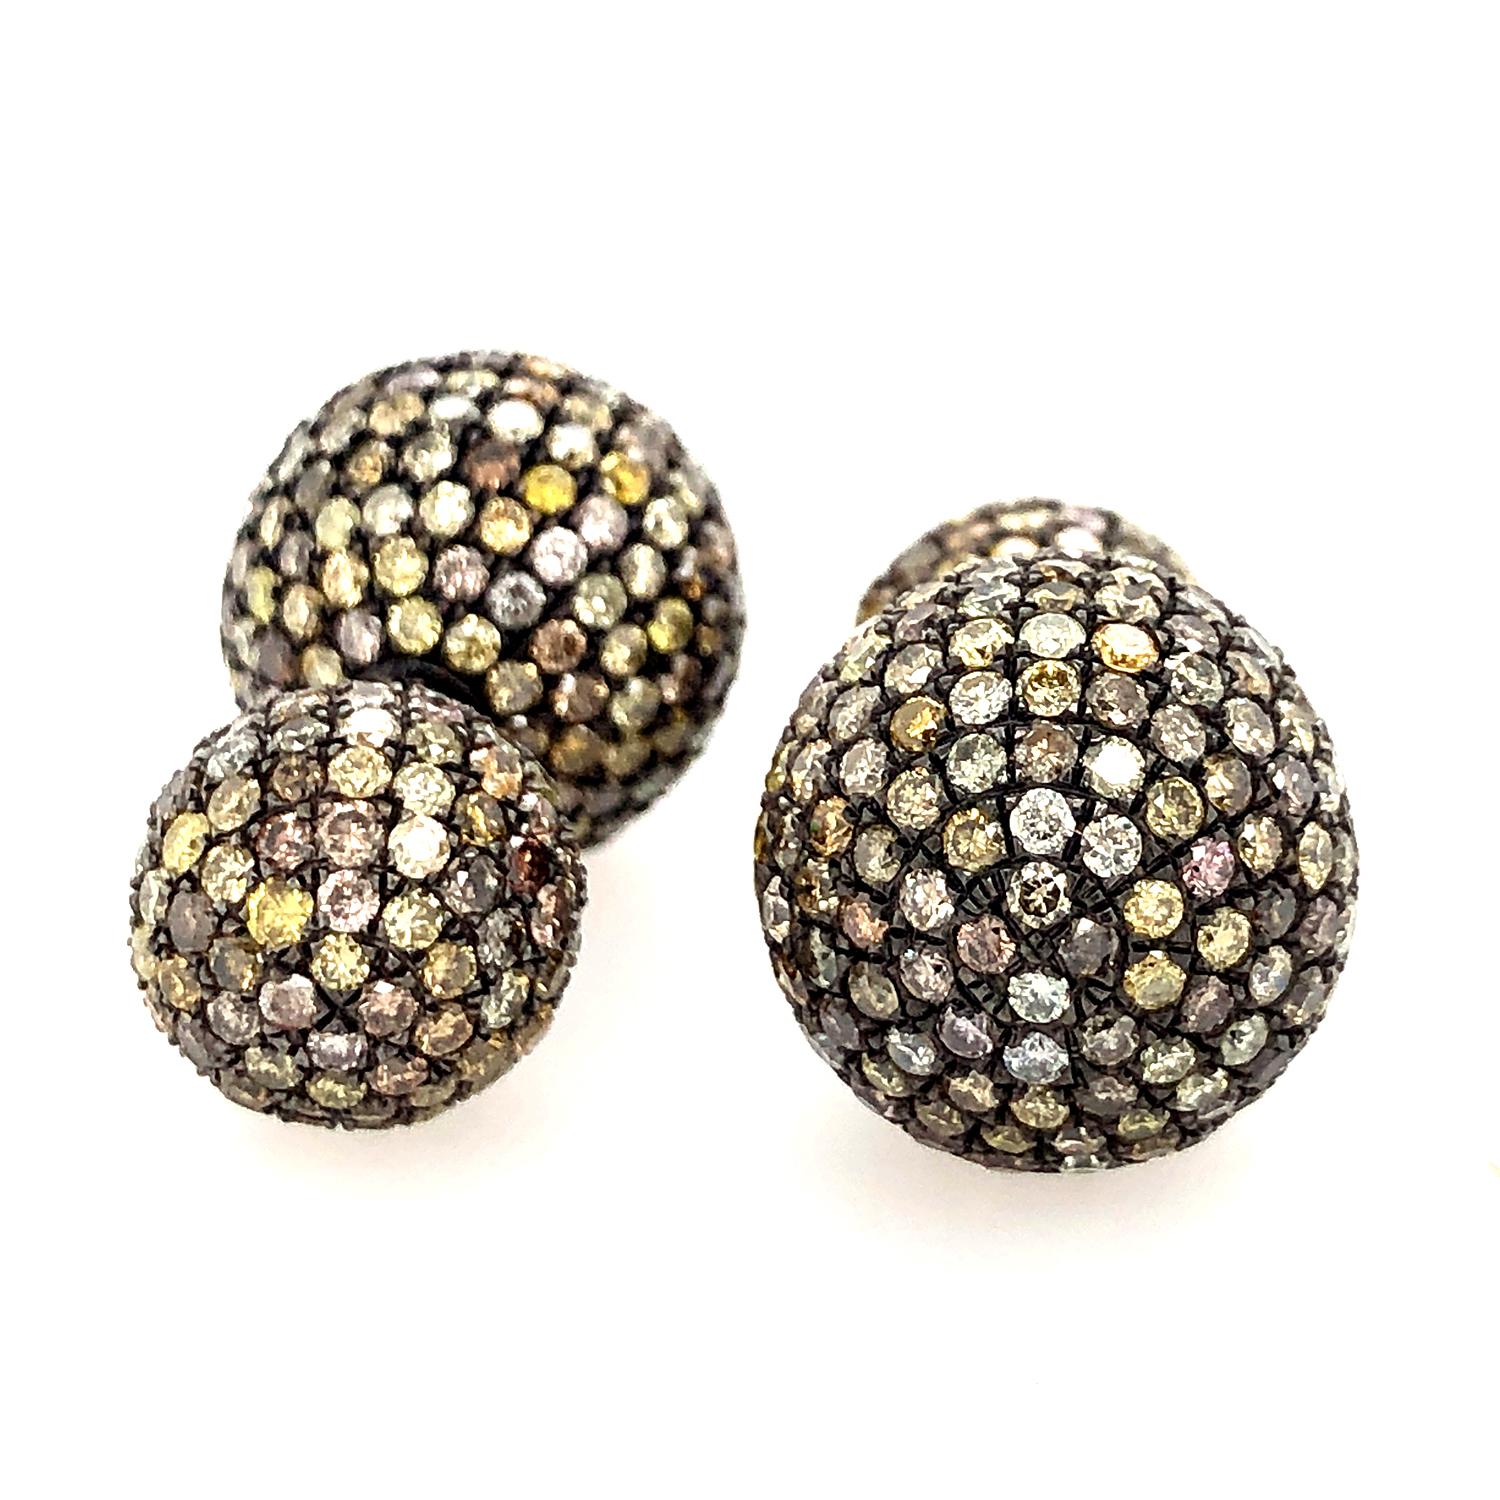 Artisan Pave Fancy Diamond Ball Tunnel Earrings Made in 14k Gold & Silver For Sale